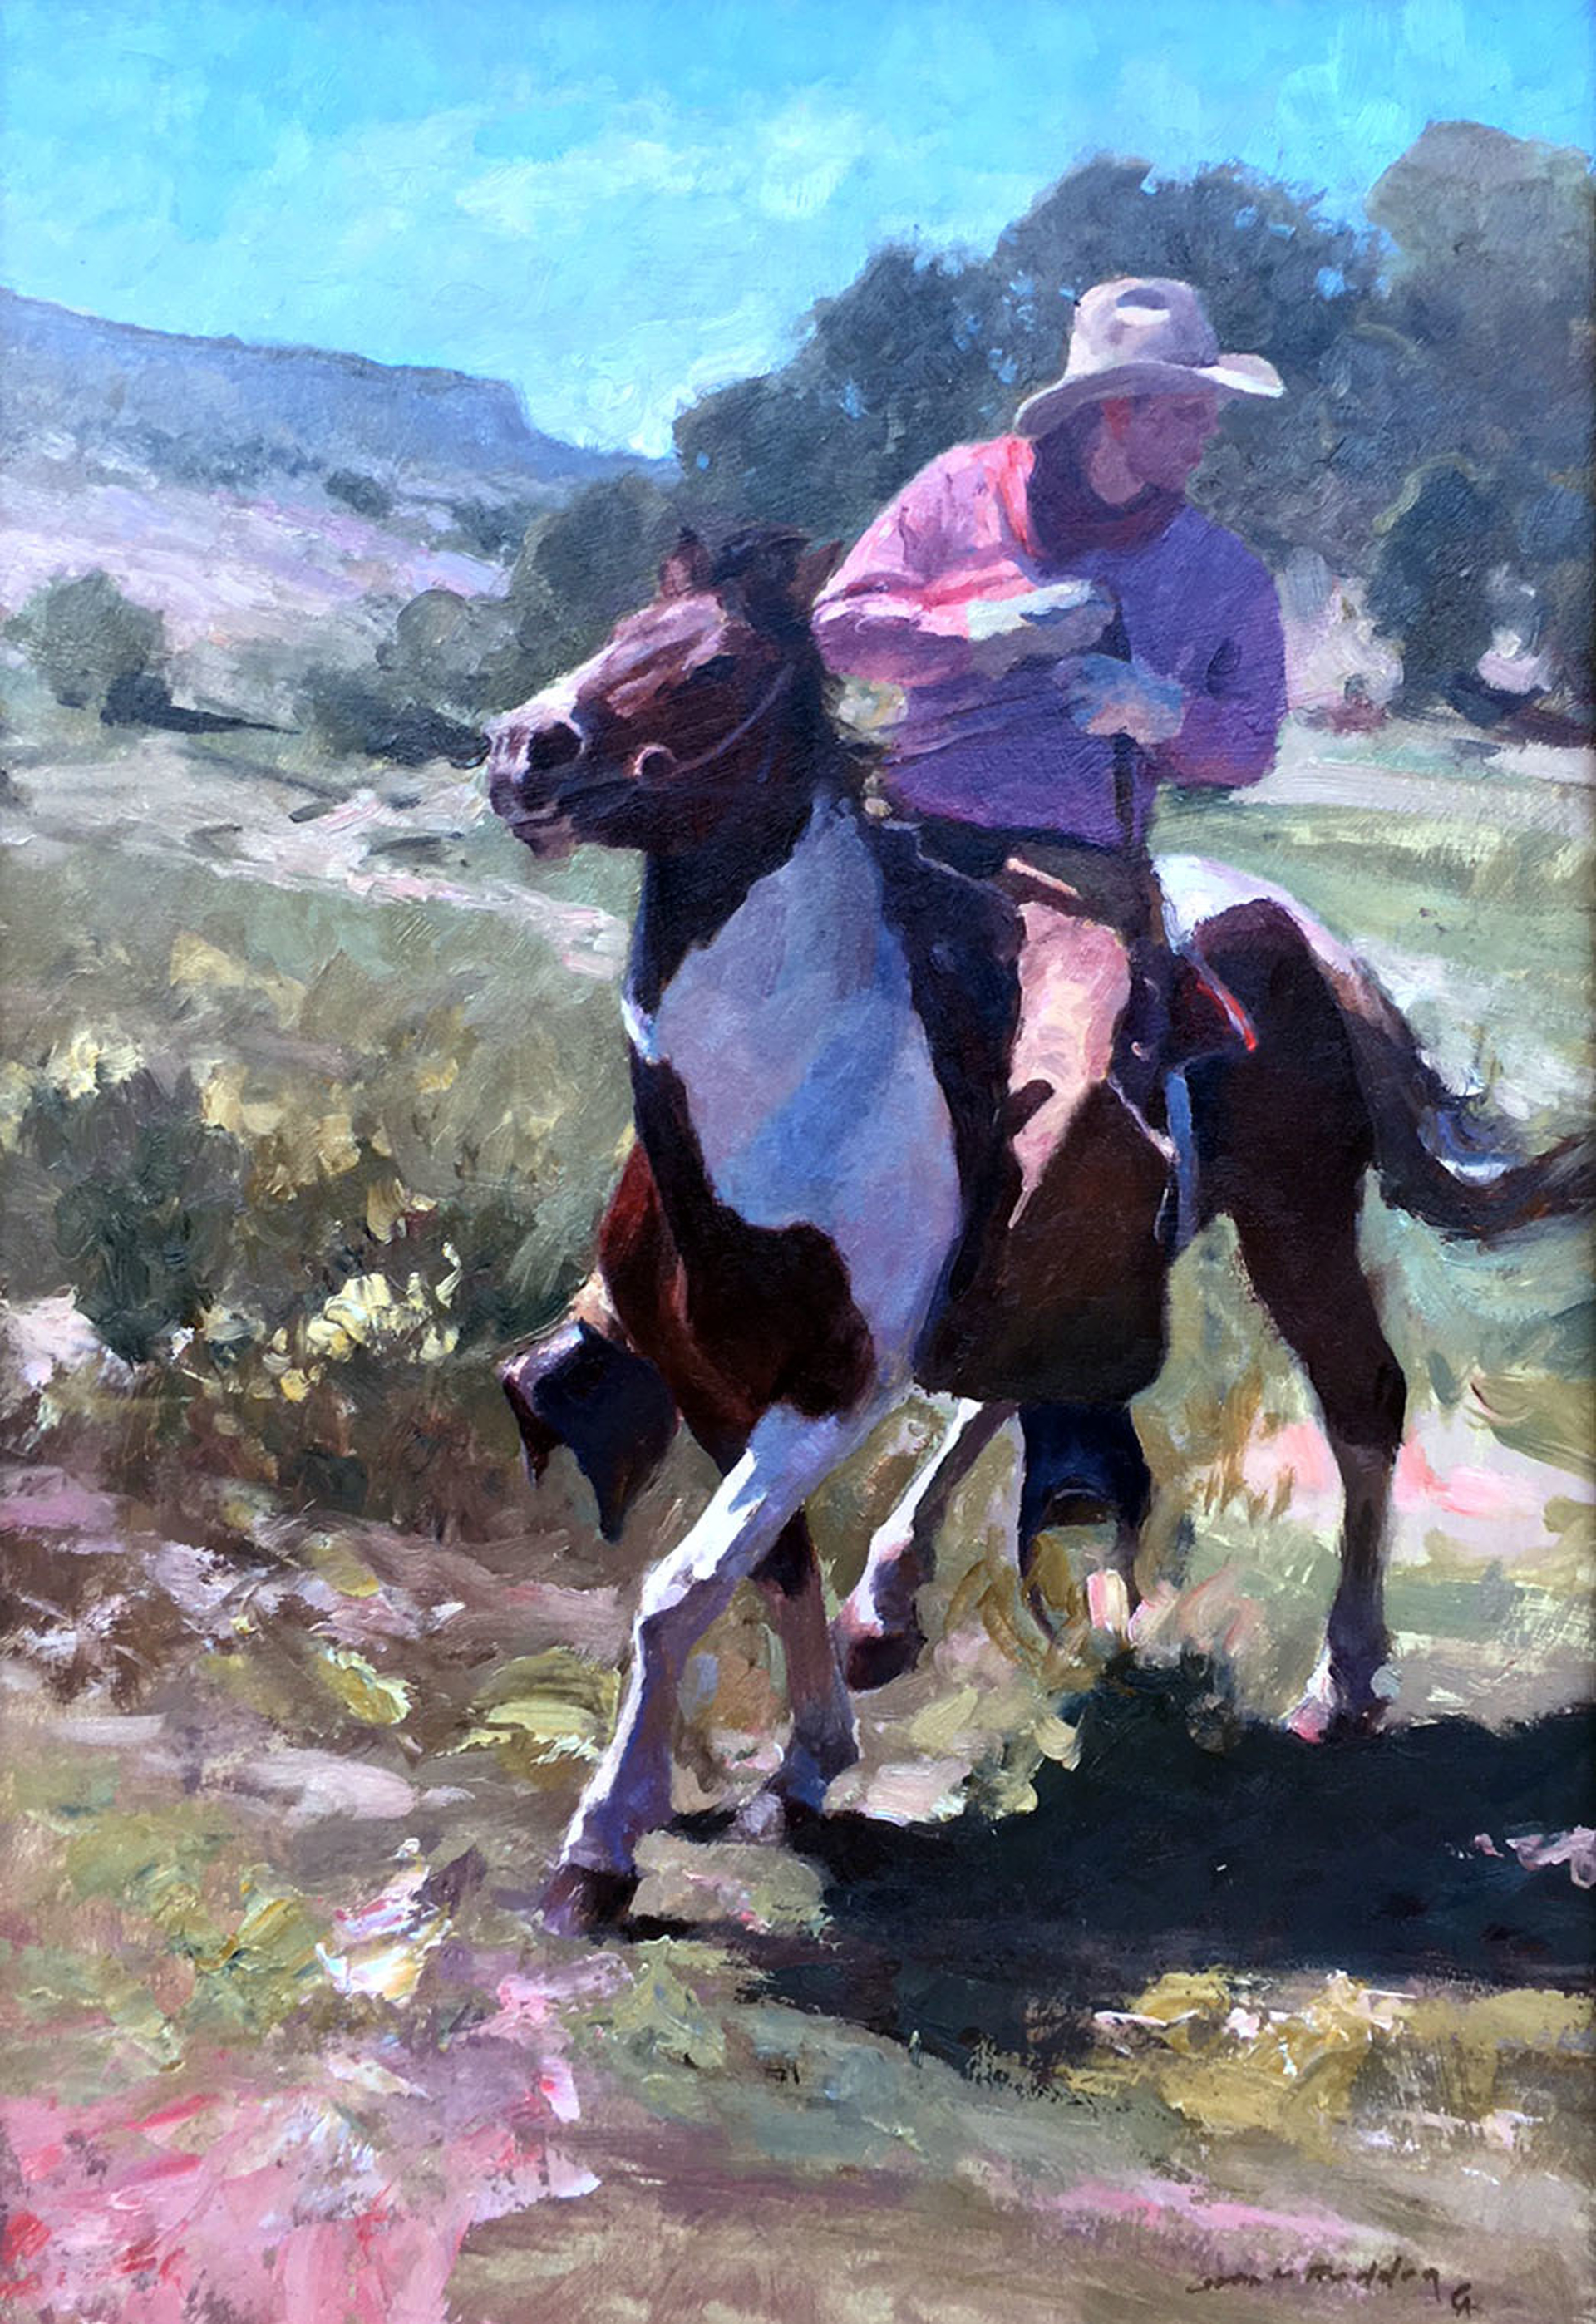 The Paint Horse by Grant Redden